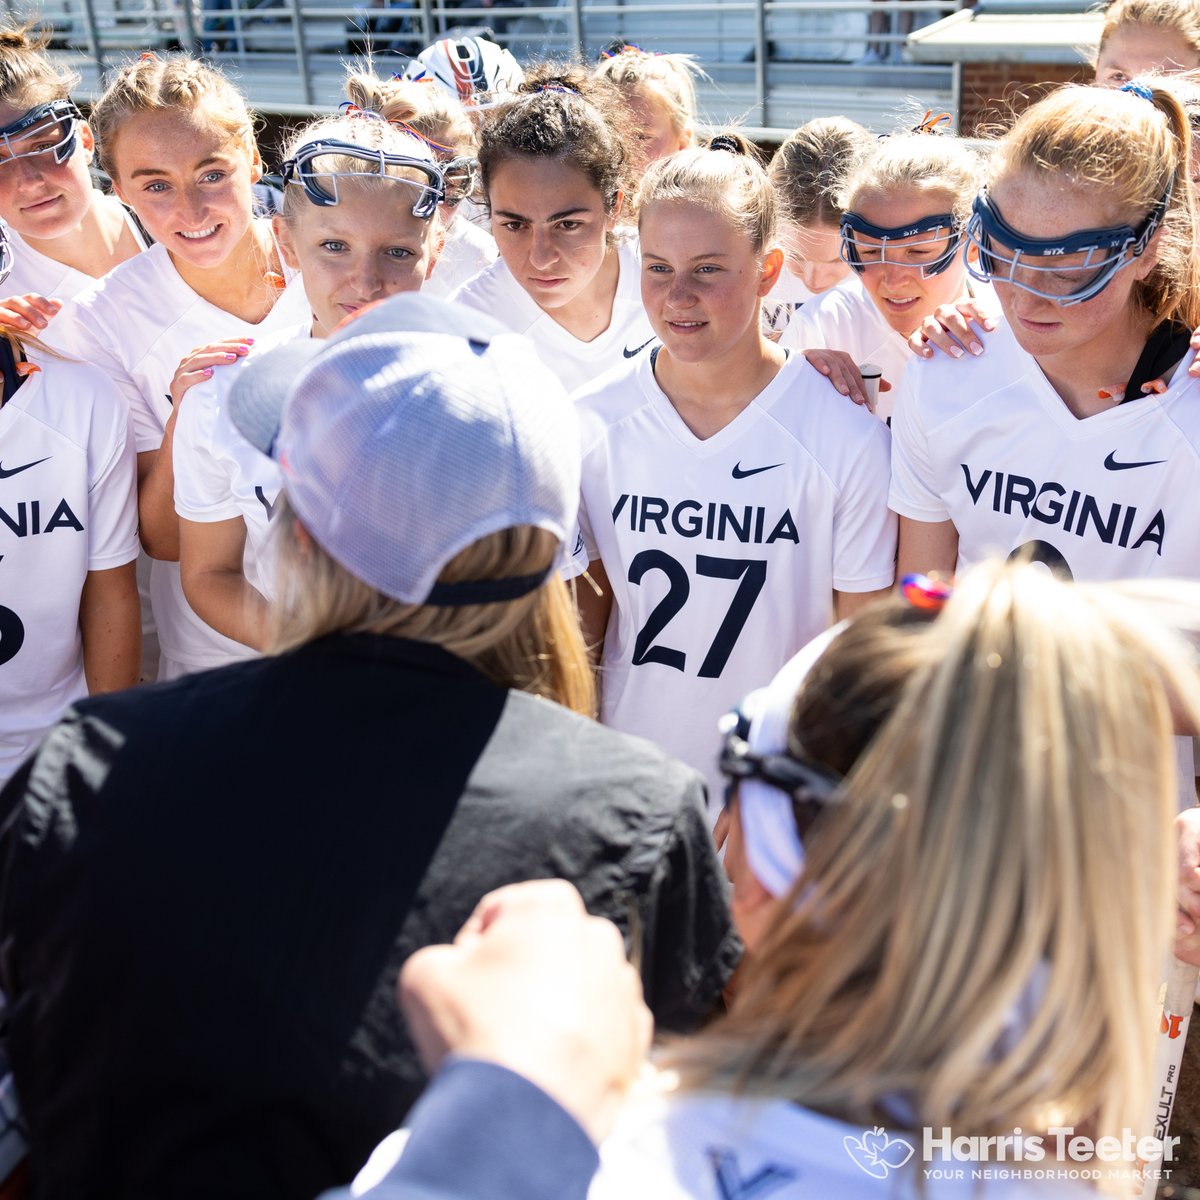 🕺💃Dancing in C’Ville!

Men’s and women’s lacrosse are dancing in the NCAA Tournament! Lars Tiffany has led men’s lacrosse to six NCAA appearances, while this will be the first NCAA appearance under Sonia LaMonica in her debut season! This is your @harristeeter VICtorius Moment!